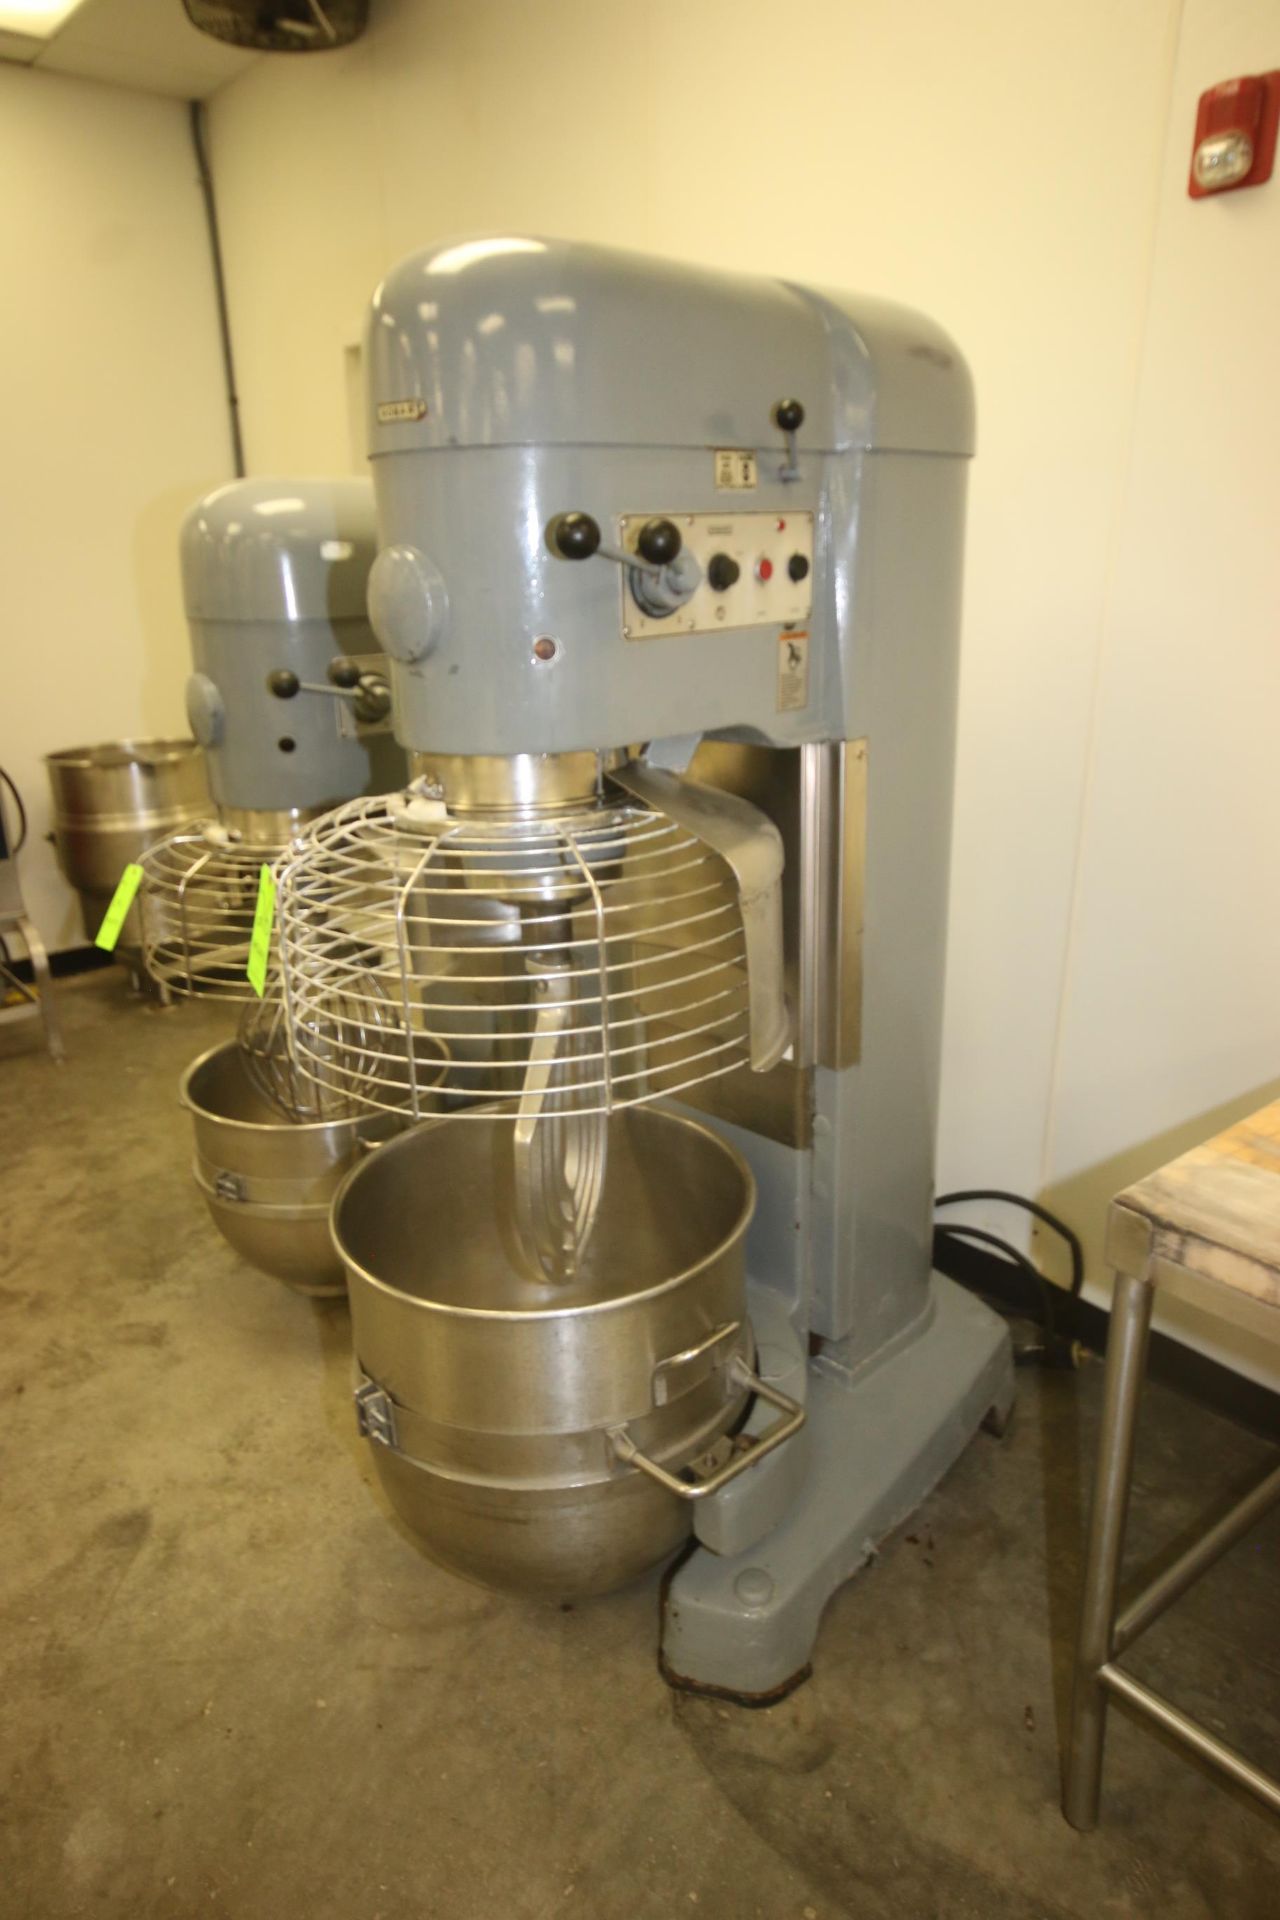 Hobart Mixer, M/N V1401, S/N 31-1303-665, with 5 hp Motor, 1750 RPM, 200 Volts, 3 Phase, with S/S